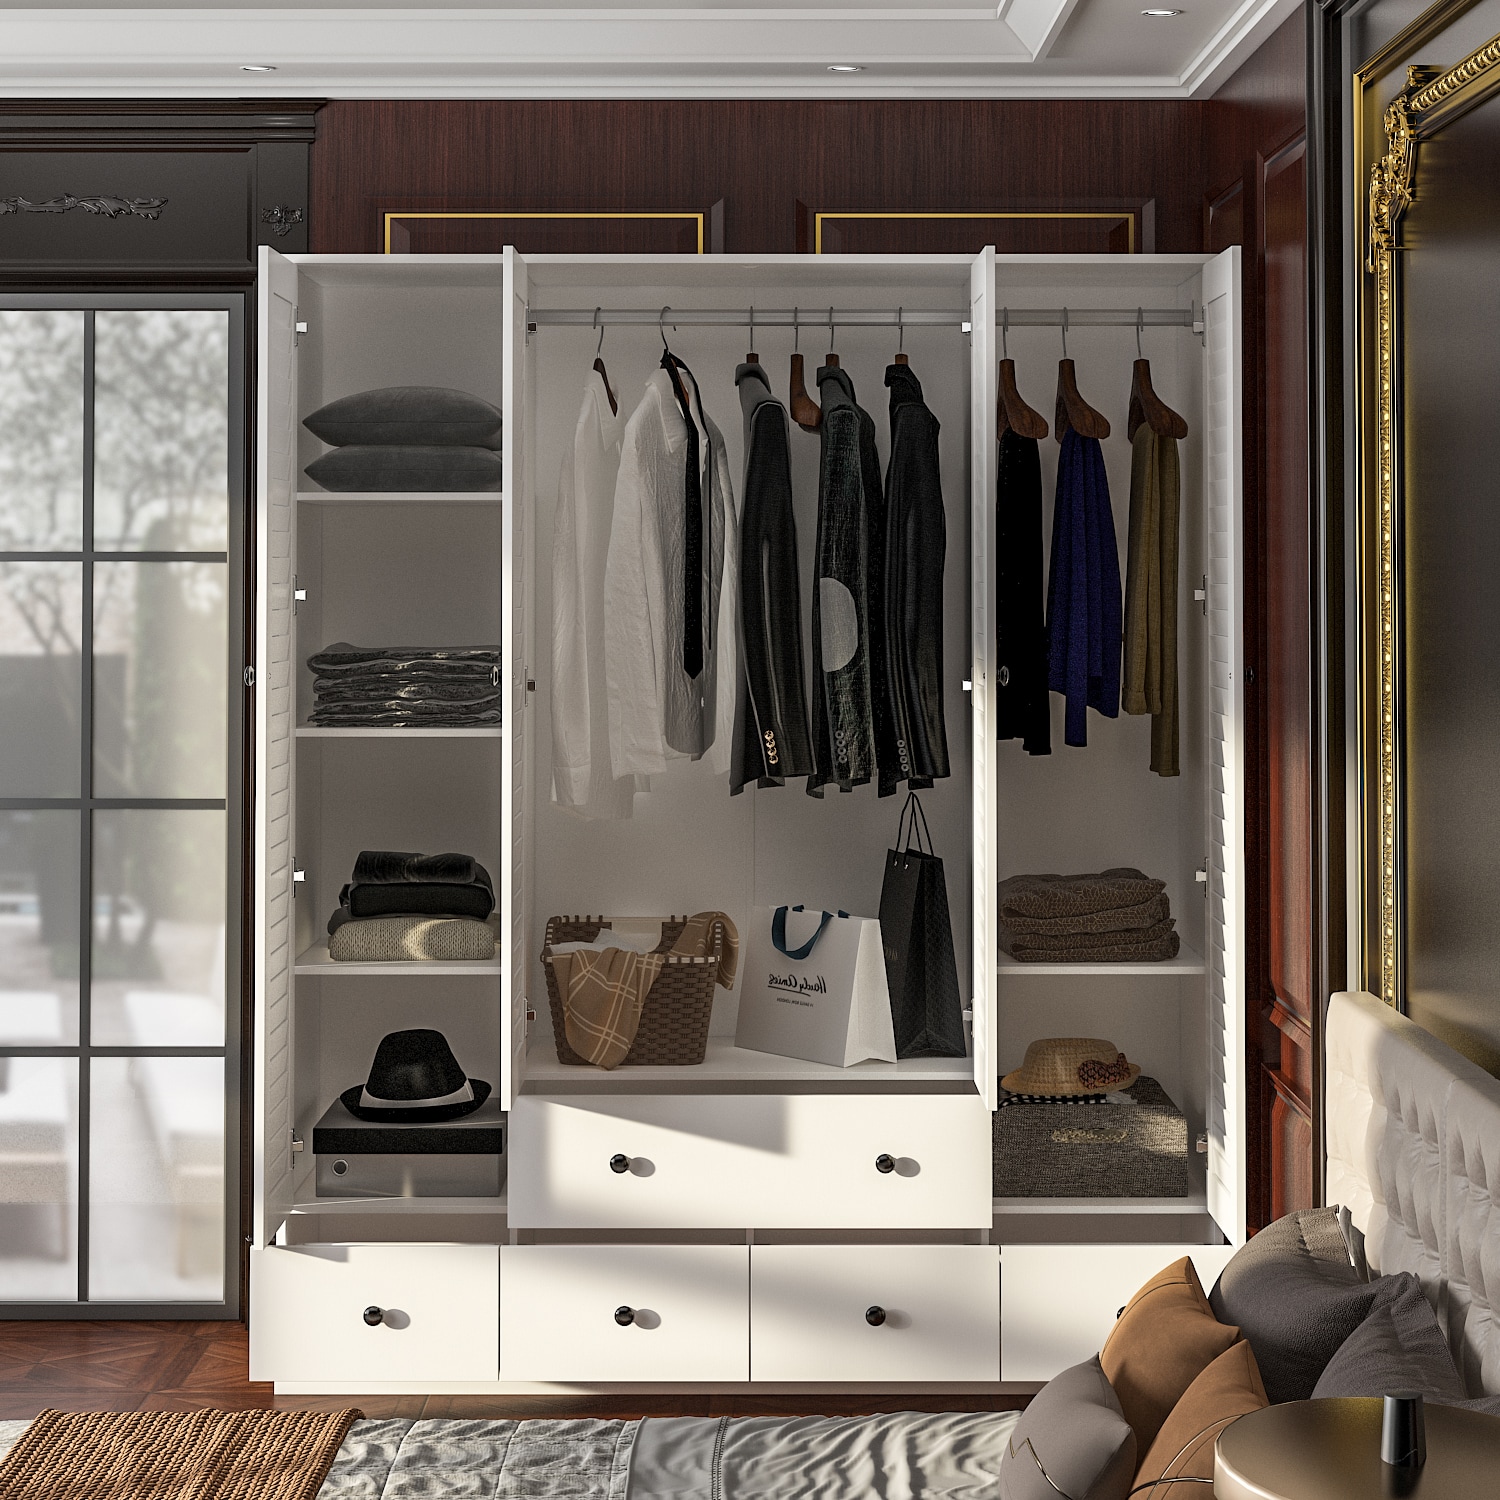 FUFU&GAGA Contemporary 3-Door Wardrobe Closet with 4 Shelves and Hanging Rod - White Finish, Assembly Required | J-JX0151-01+02